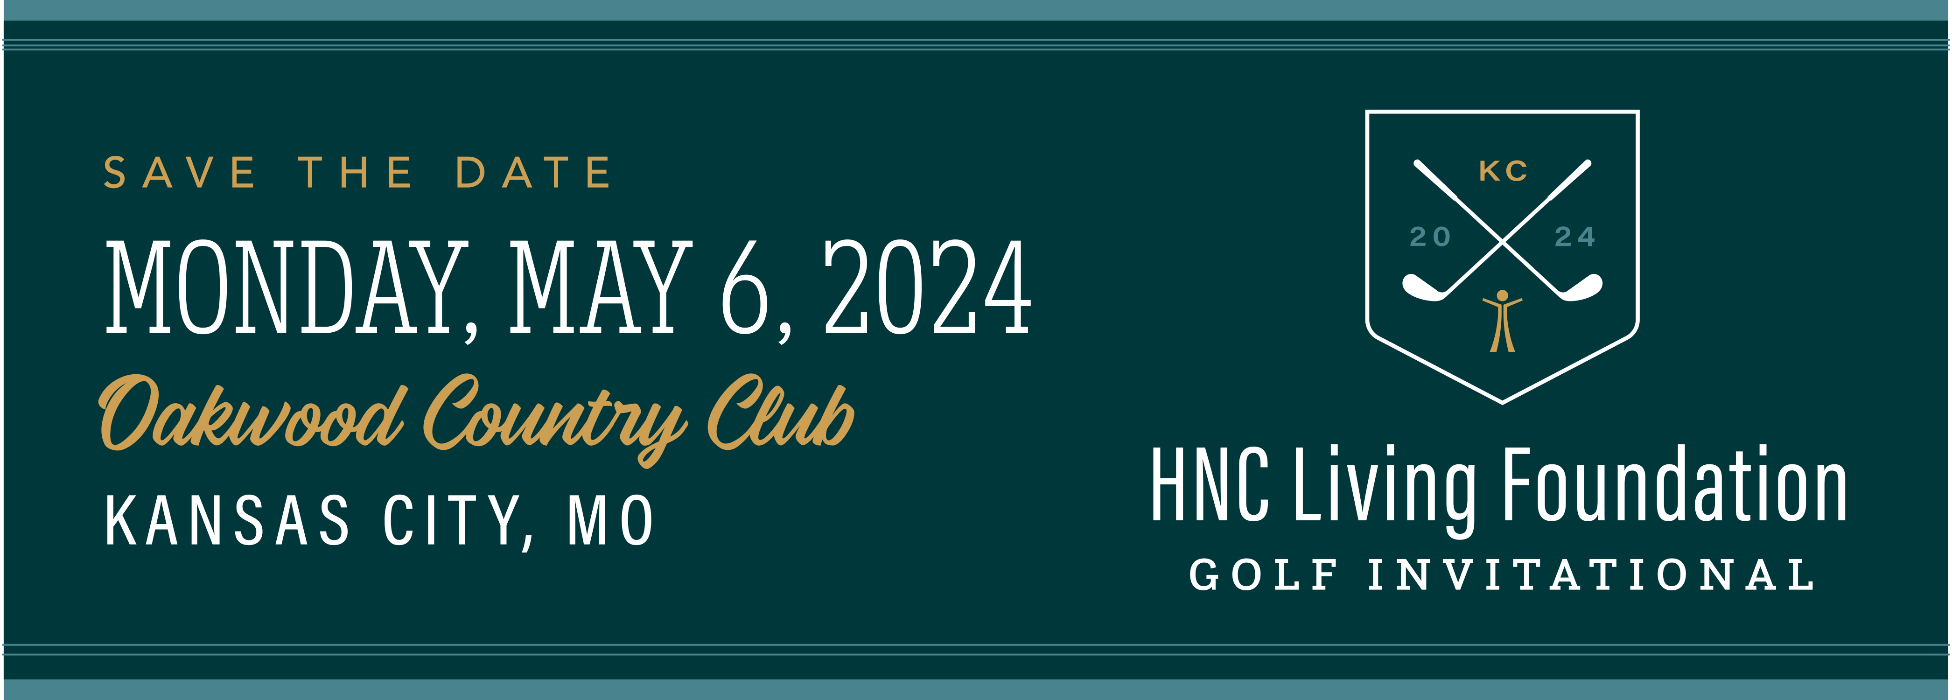 Save the date: Monday, May 6, 2024. HNC Living Golf Foundation Invitational